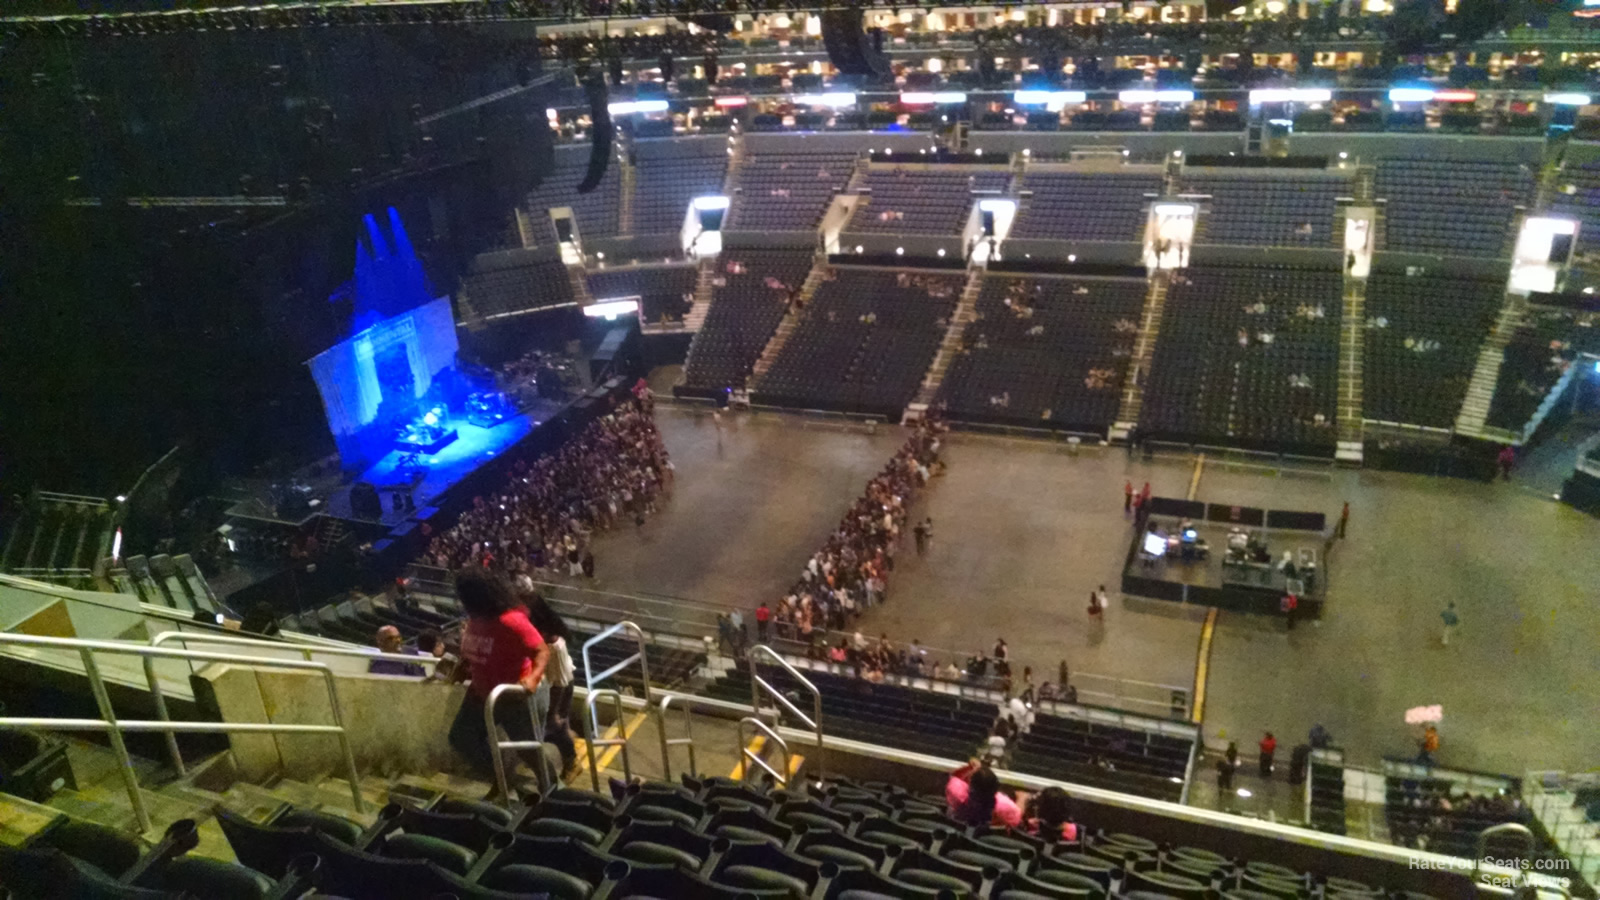 section 317, row 12 seat view  for concert - crypto.com arena